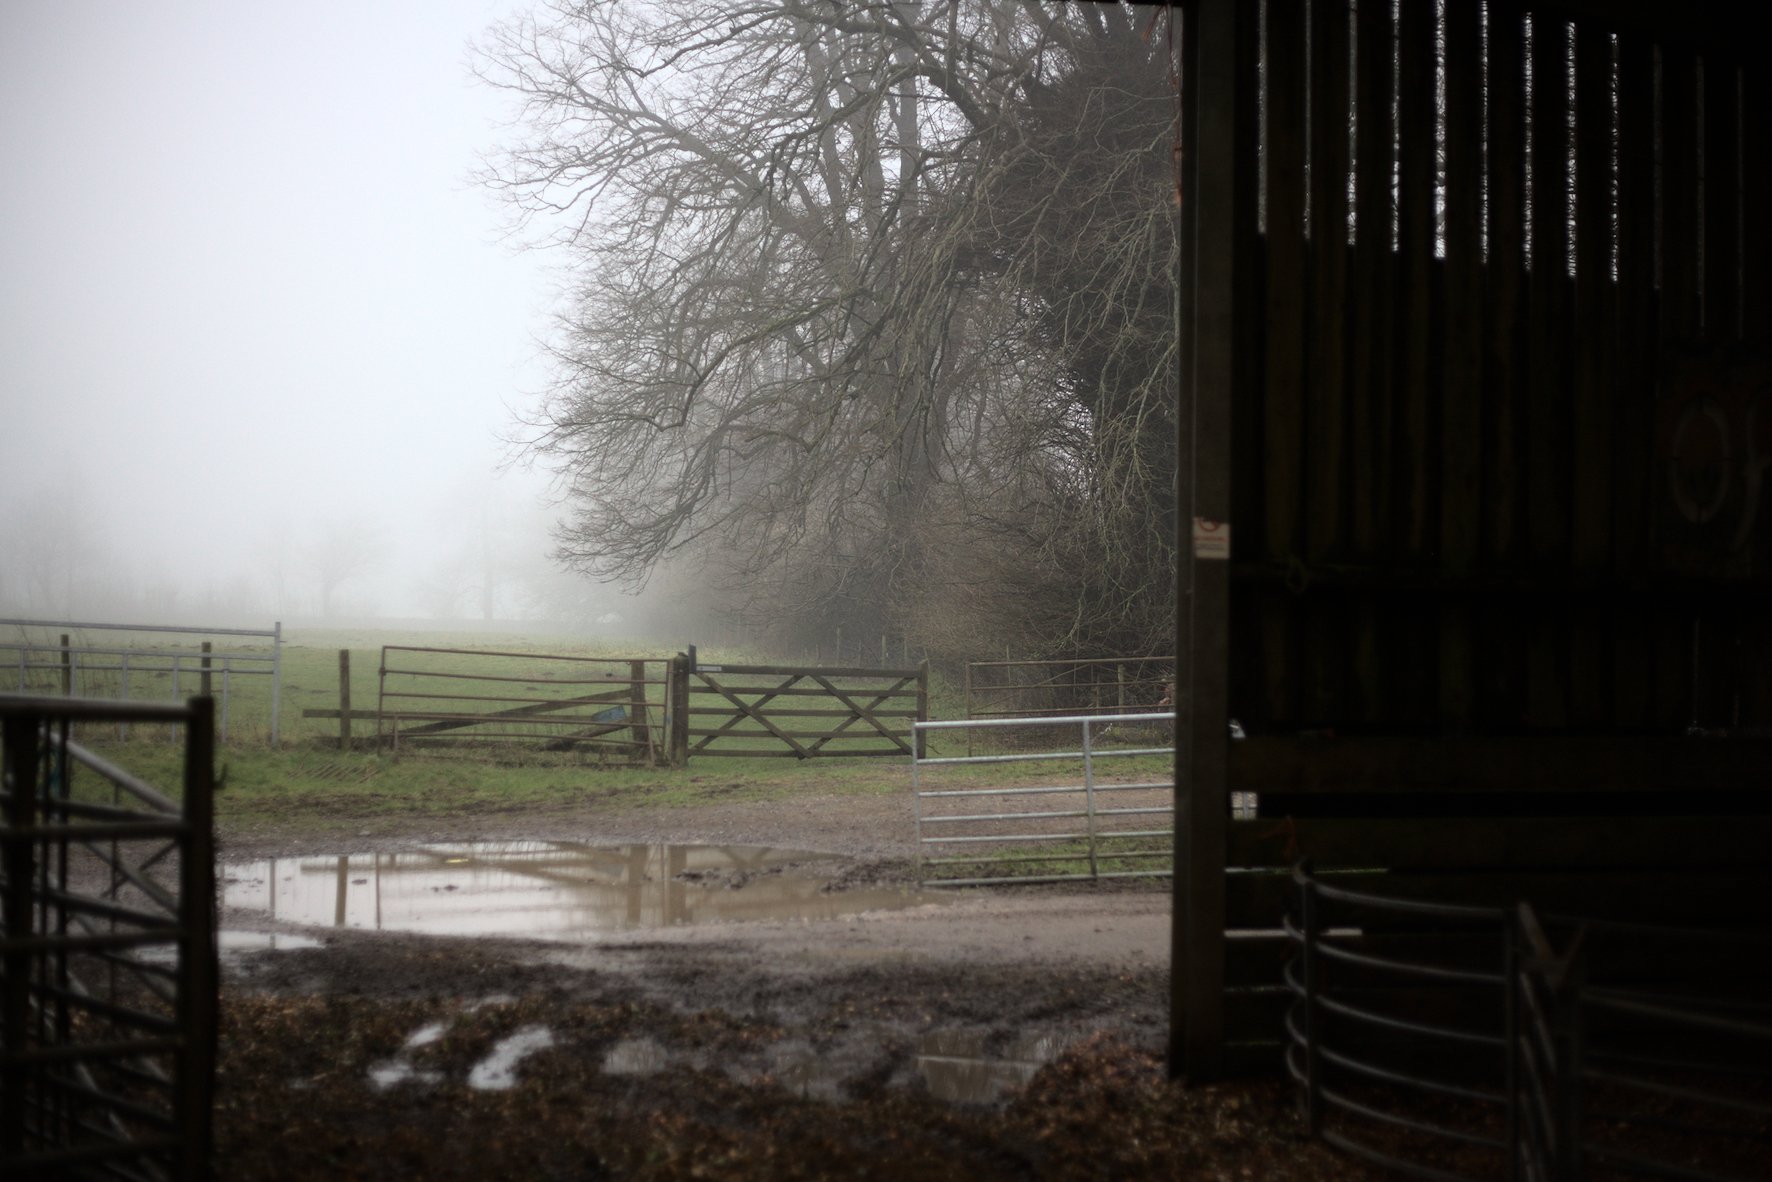 Landscape photograph by Hatty Frances Bell looking out of the wool barn at Fernhill Farm in Somerset